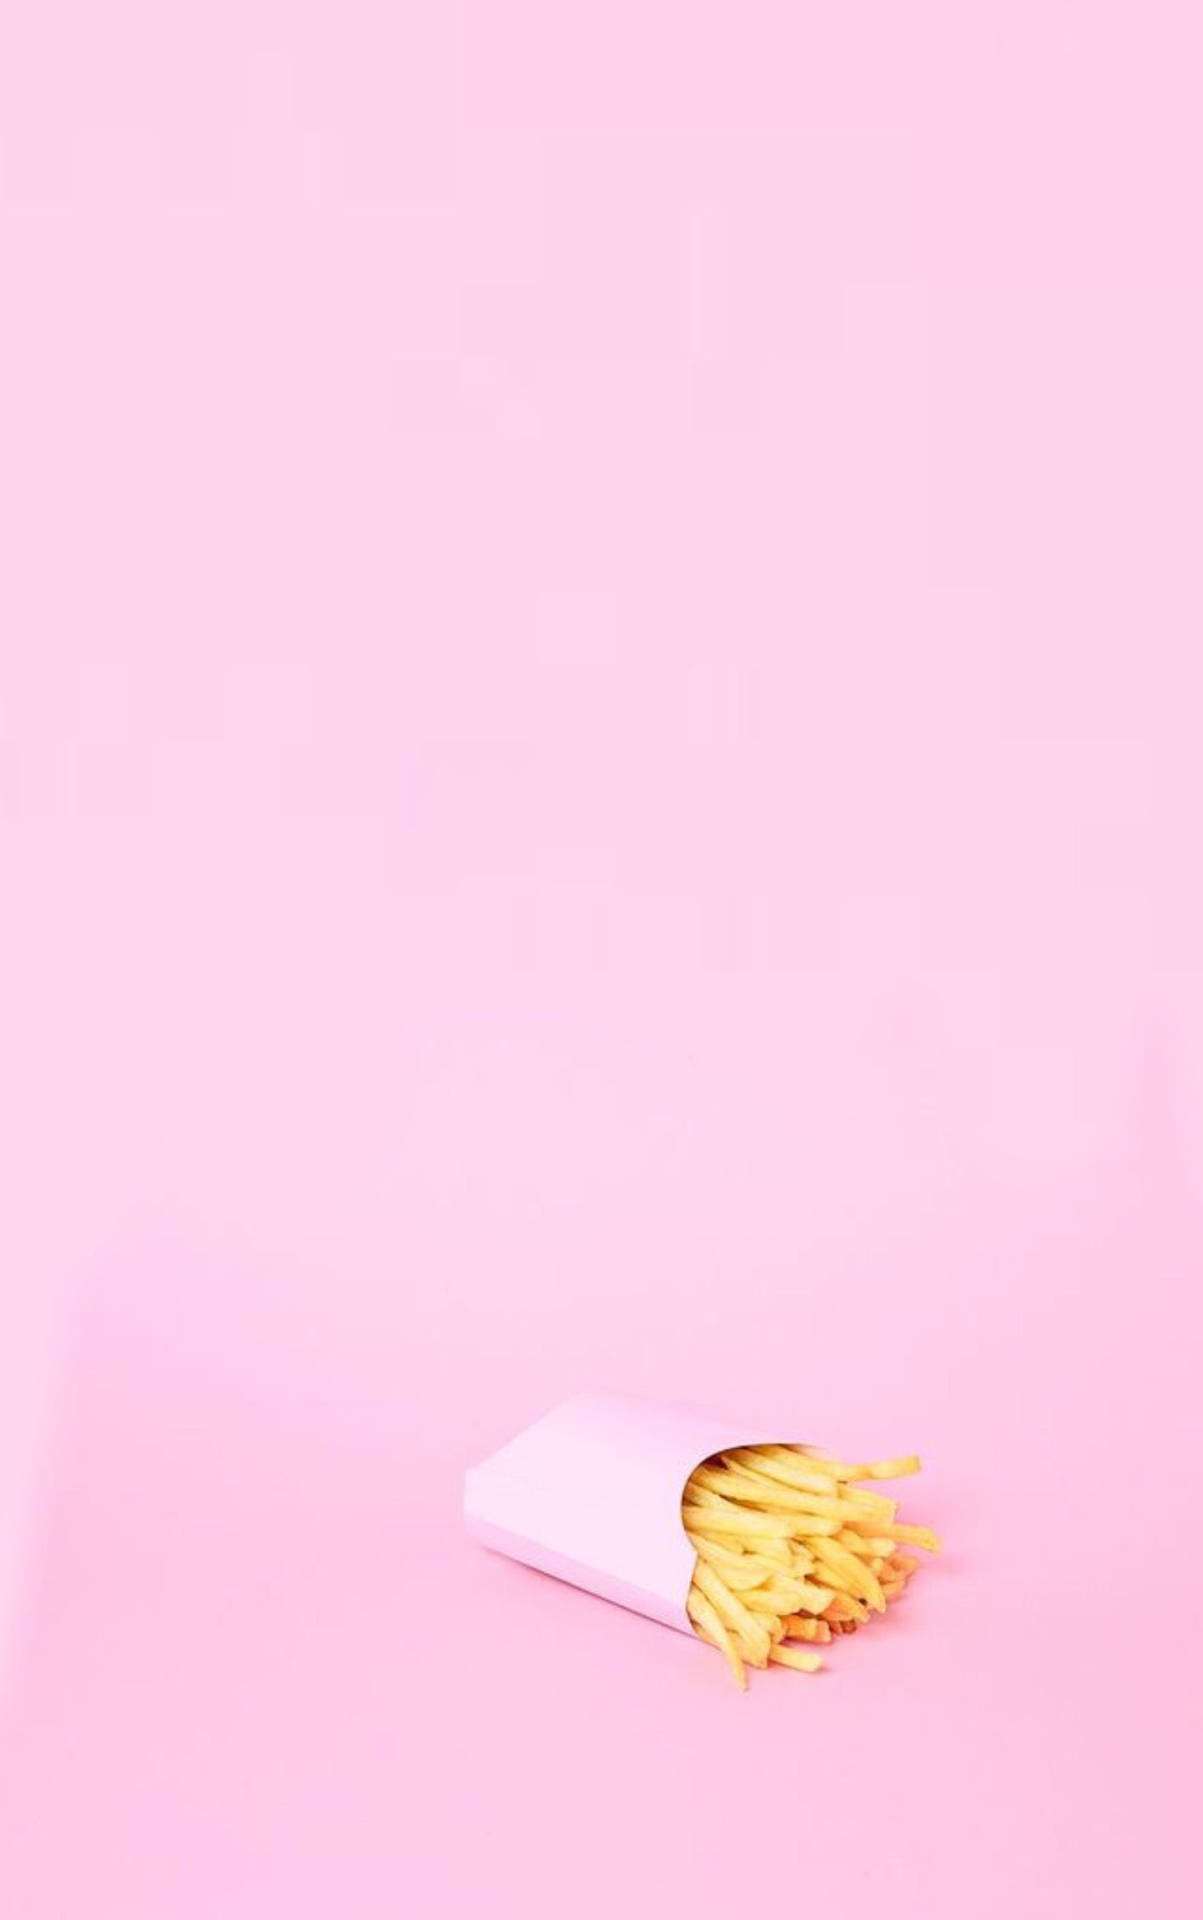 French Fries Plain Pink Wallpaper